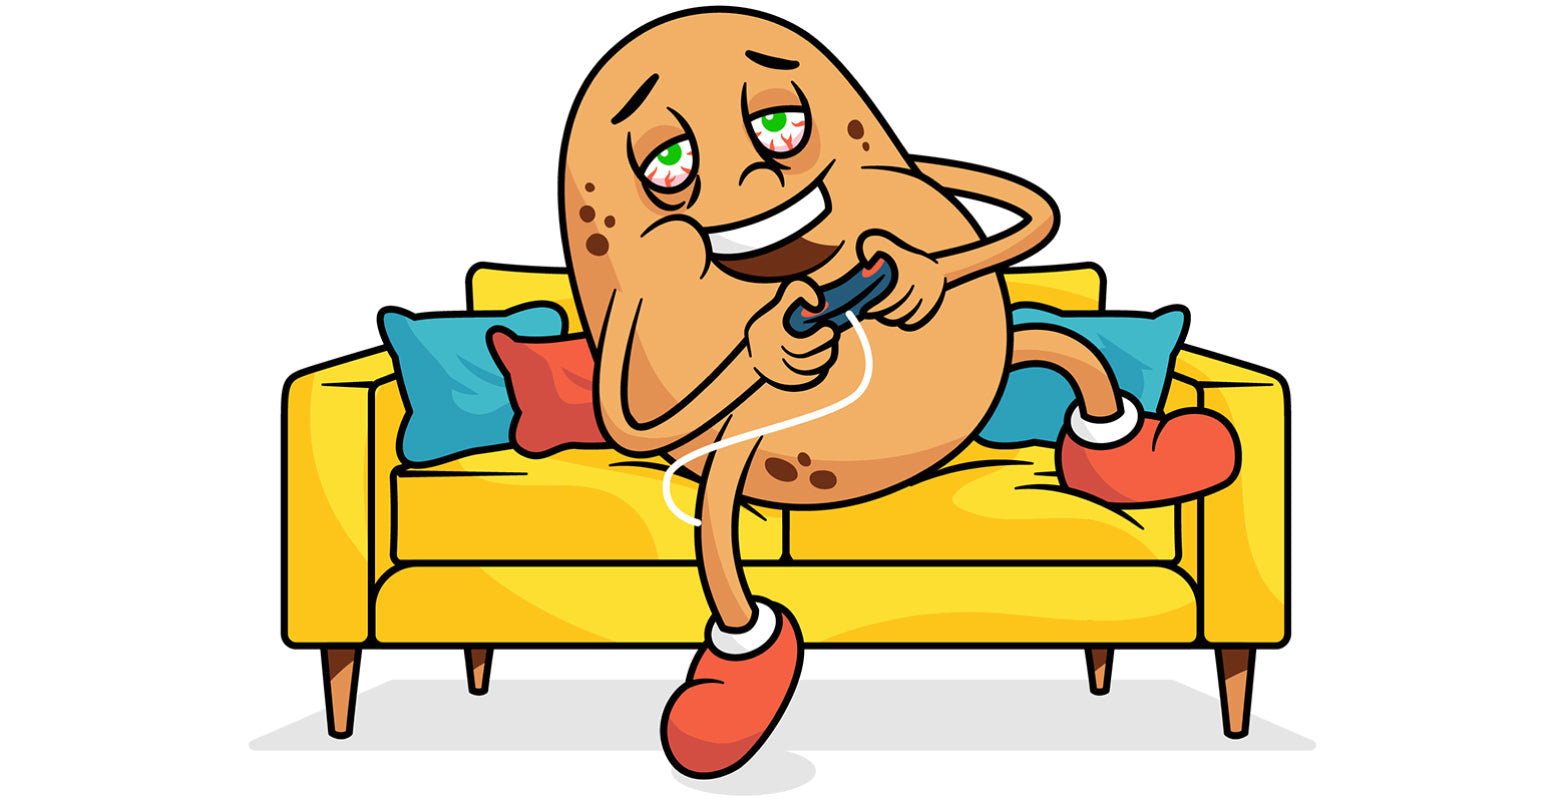 A cartoon drawing of a couch potato looking 